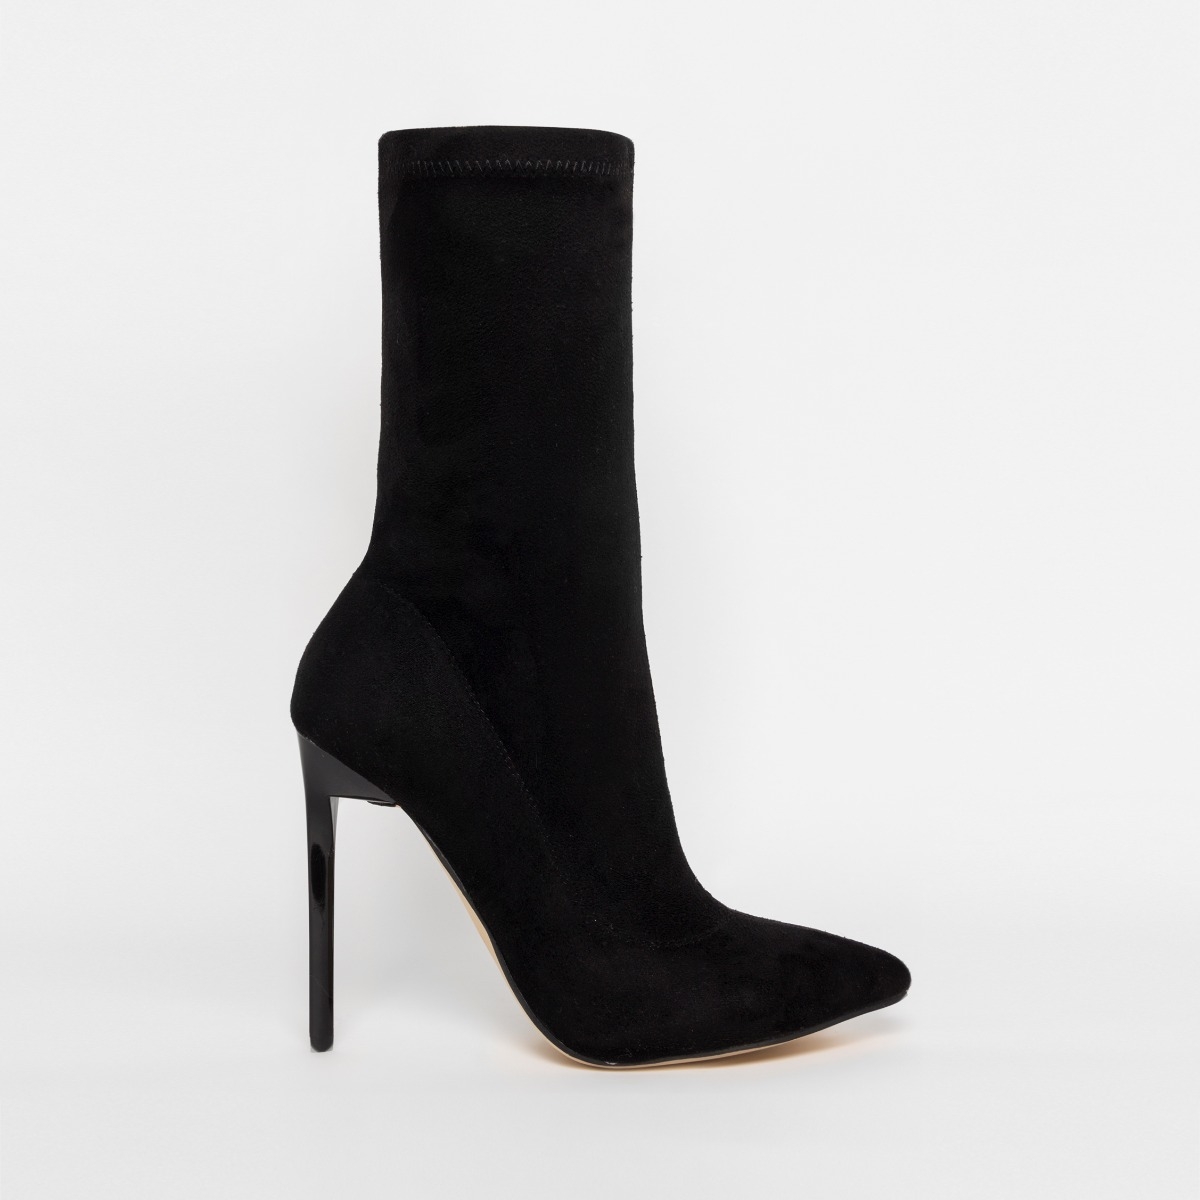 Lucinda Black Suede Stiletto Ankle Boots